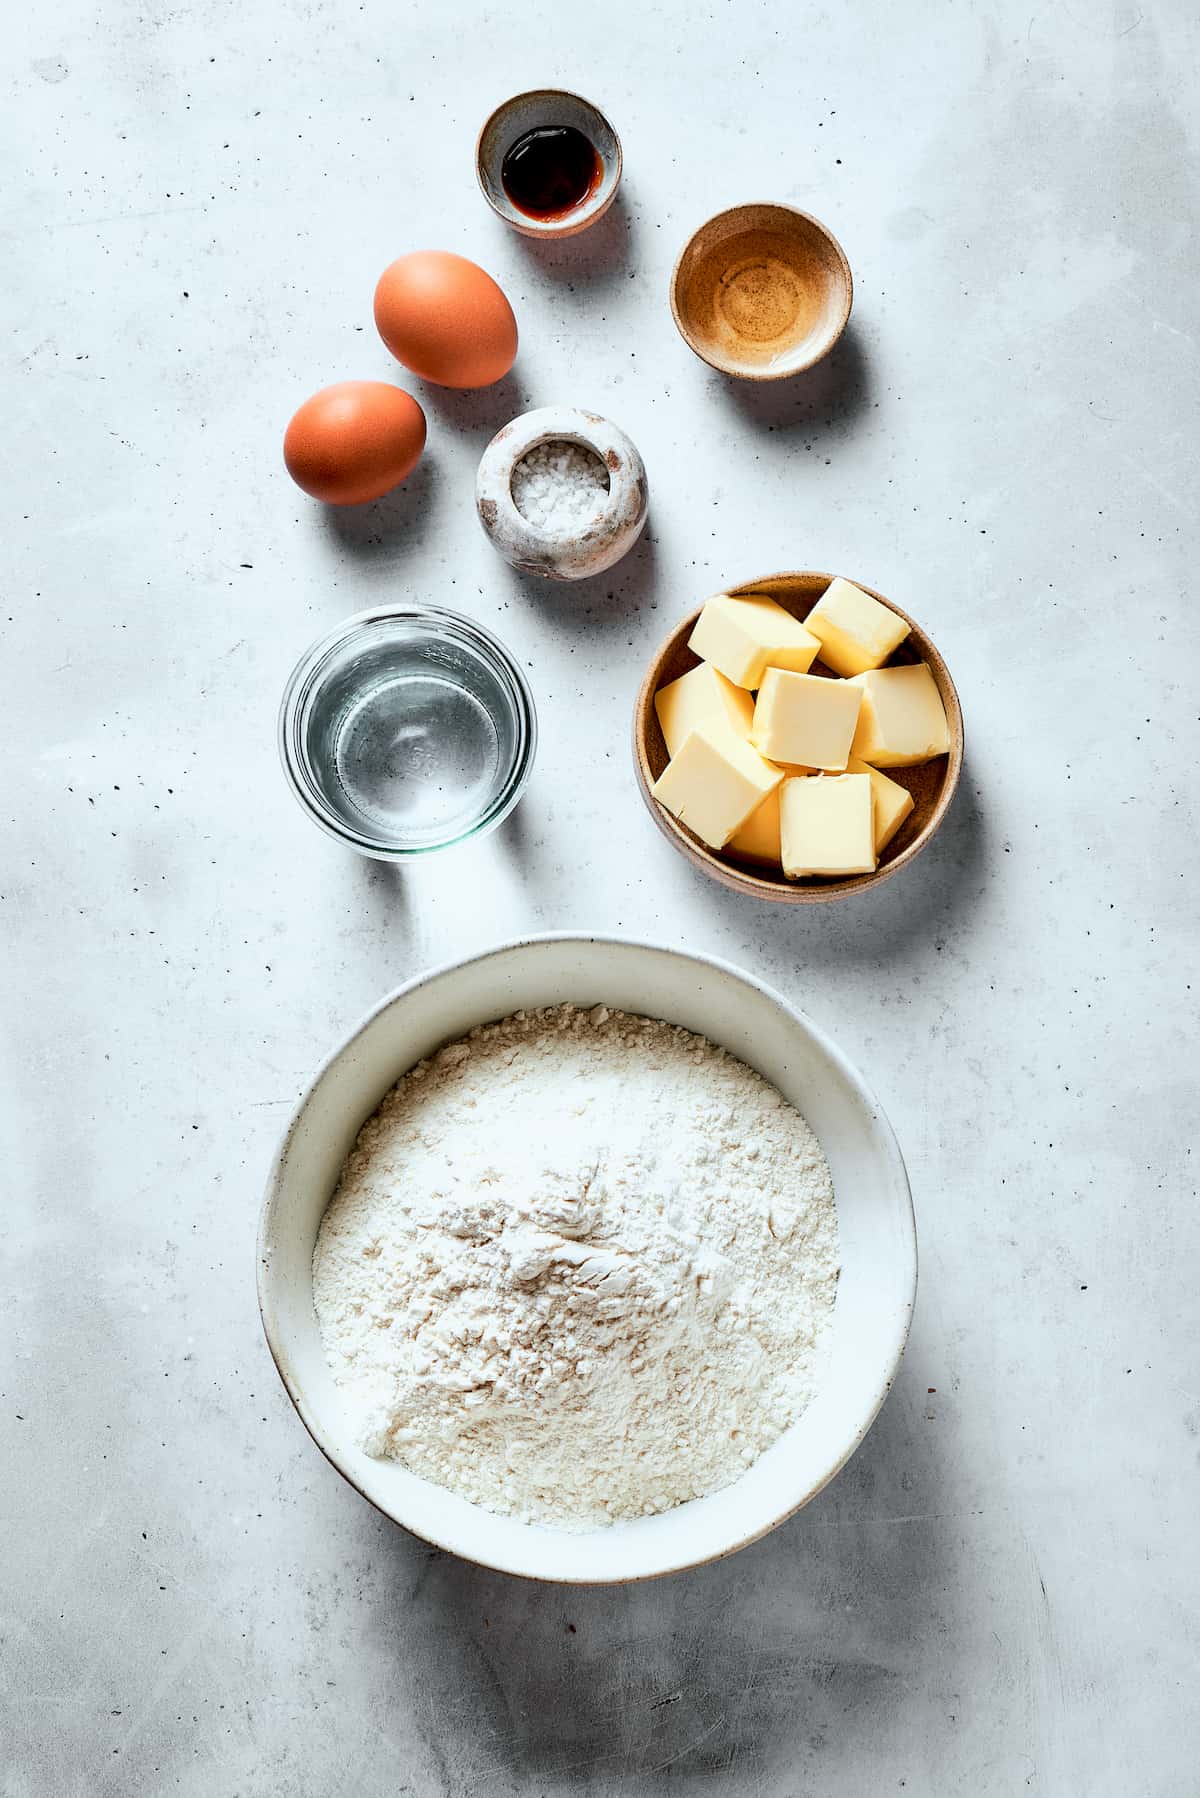 Ingredients to make pastry dough are shown: eggs, vanilla paste, sugar, butter, vinegar.